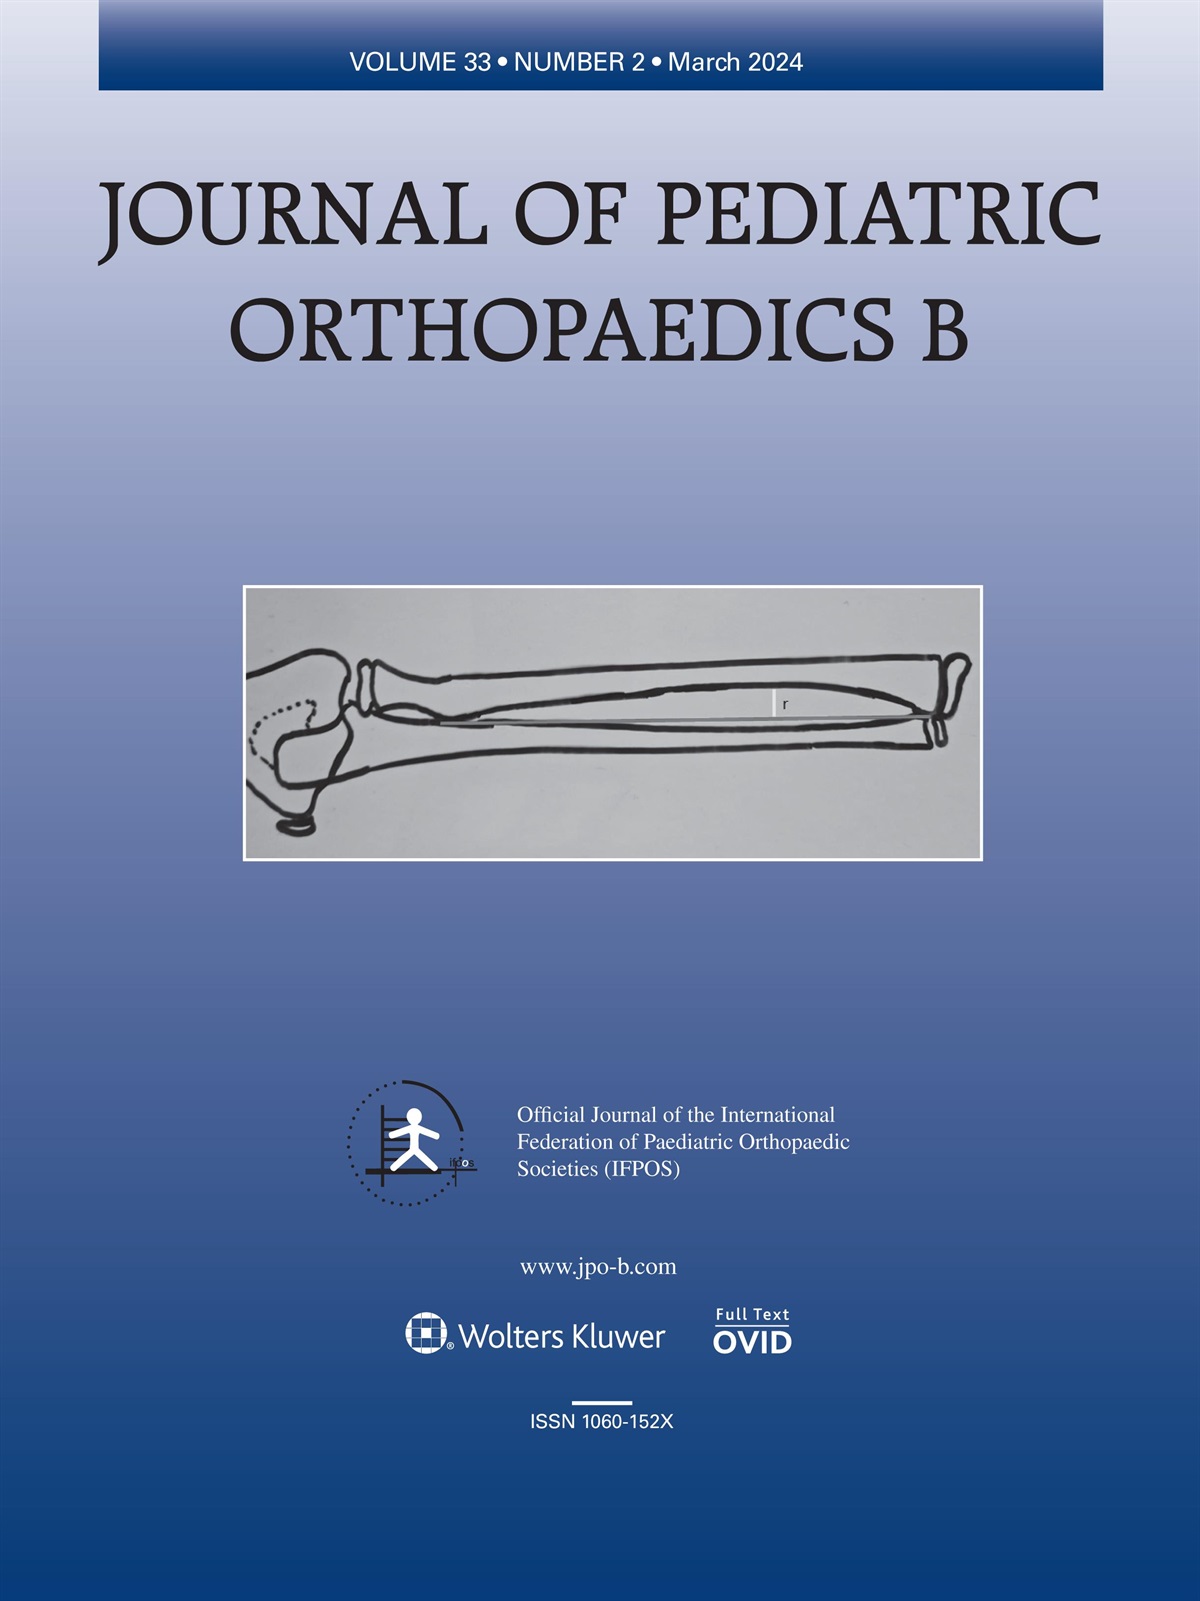 The Johns Hopkins classification system used in pediatric supracondylar humerus fractures requires more experience than the Gartland system